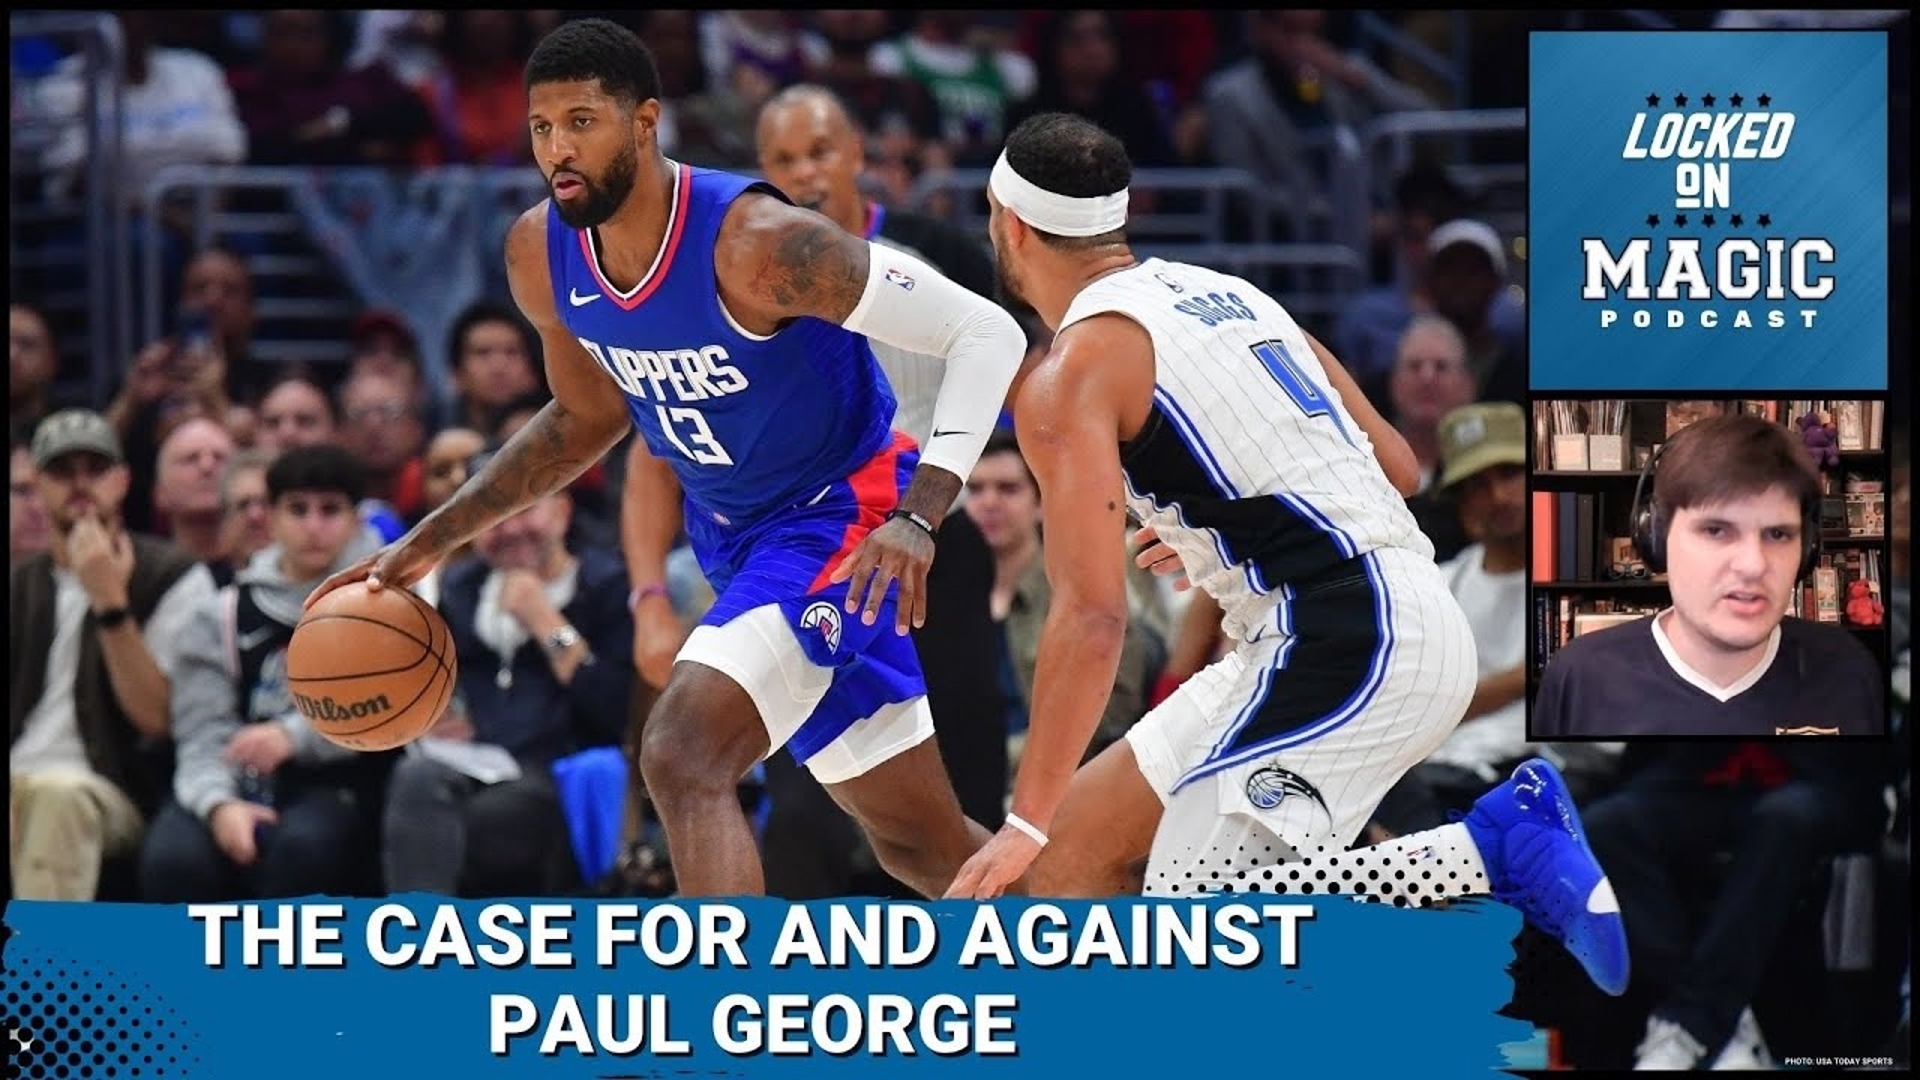 I honestly cannot find a basketball reason for the Orlando Magic not to pursue Paul George.